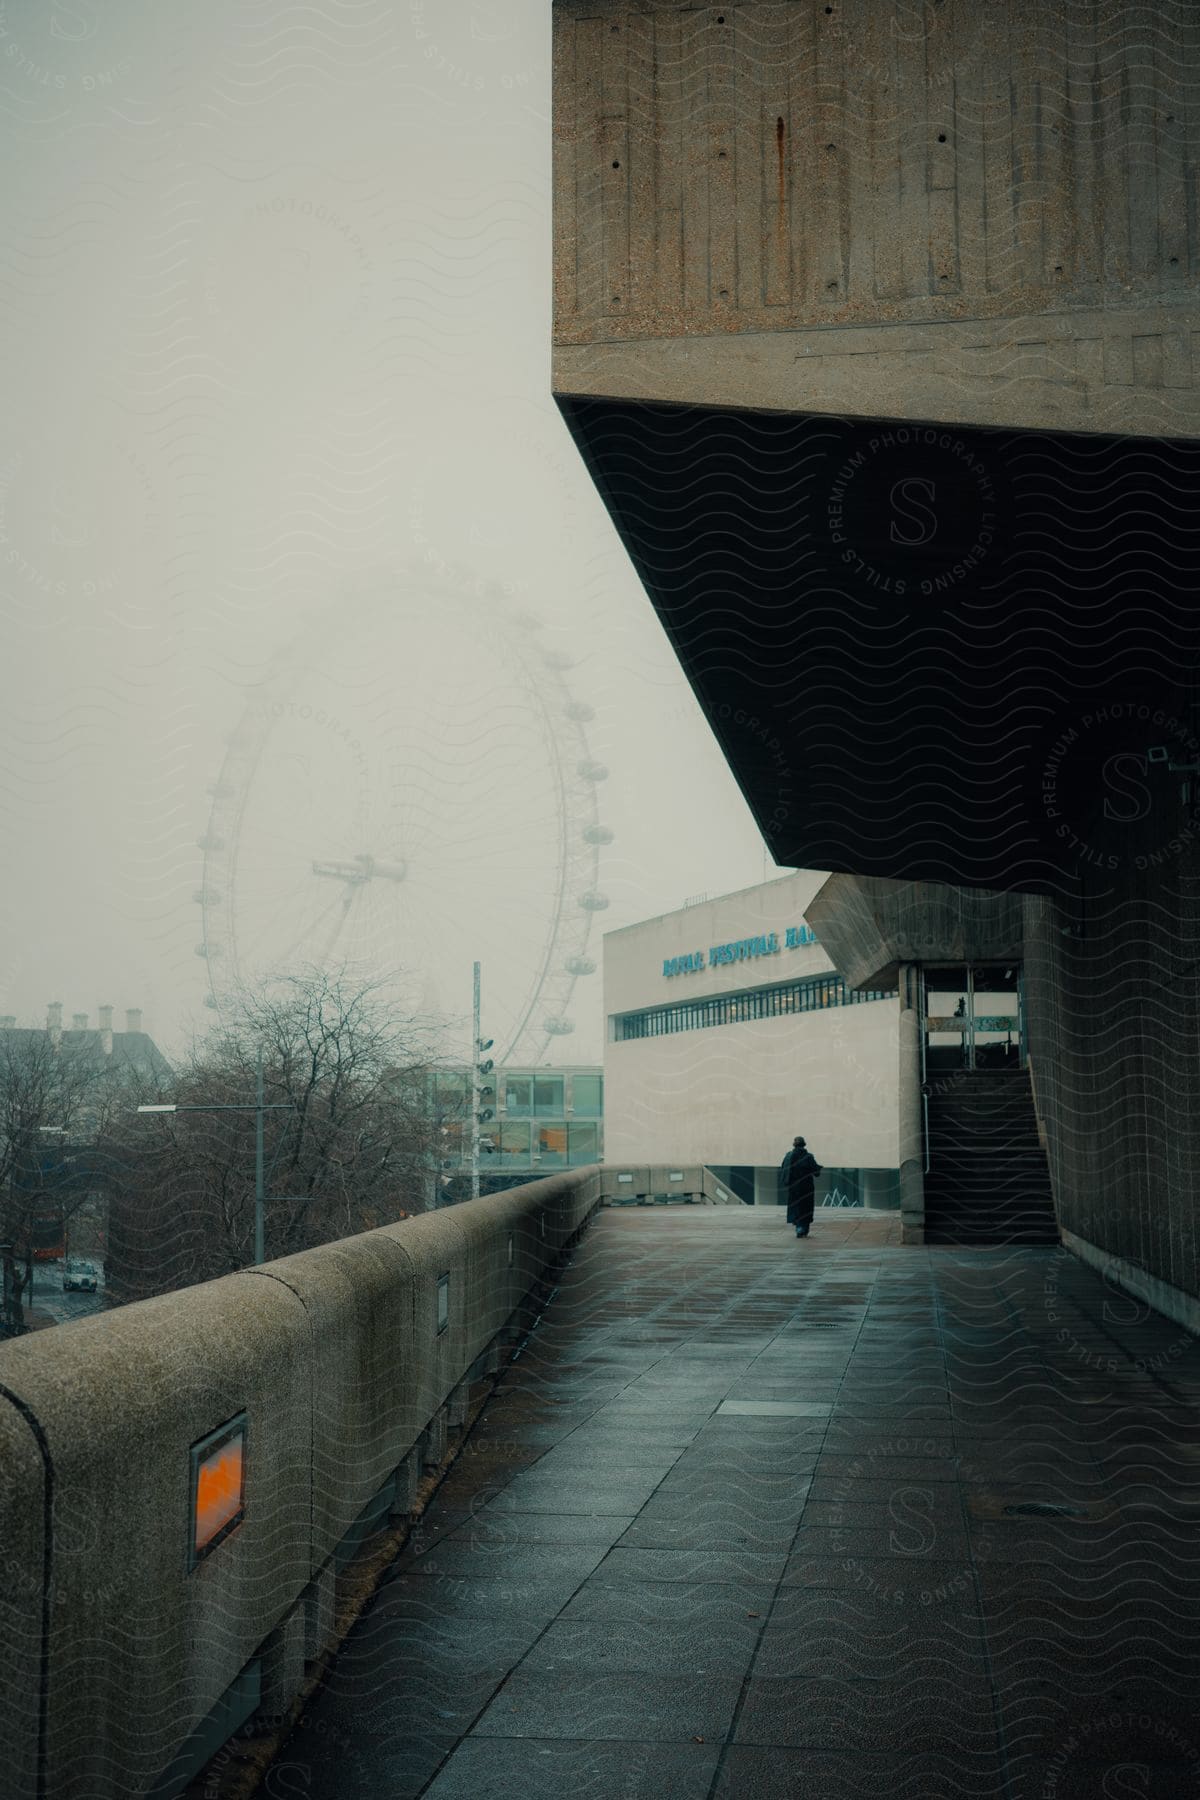 External corridor of the National Theater on a foggy day with a Ferris wheel in the background.